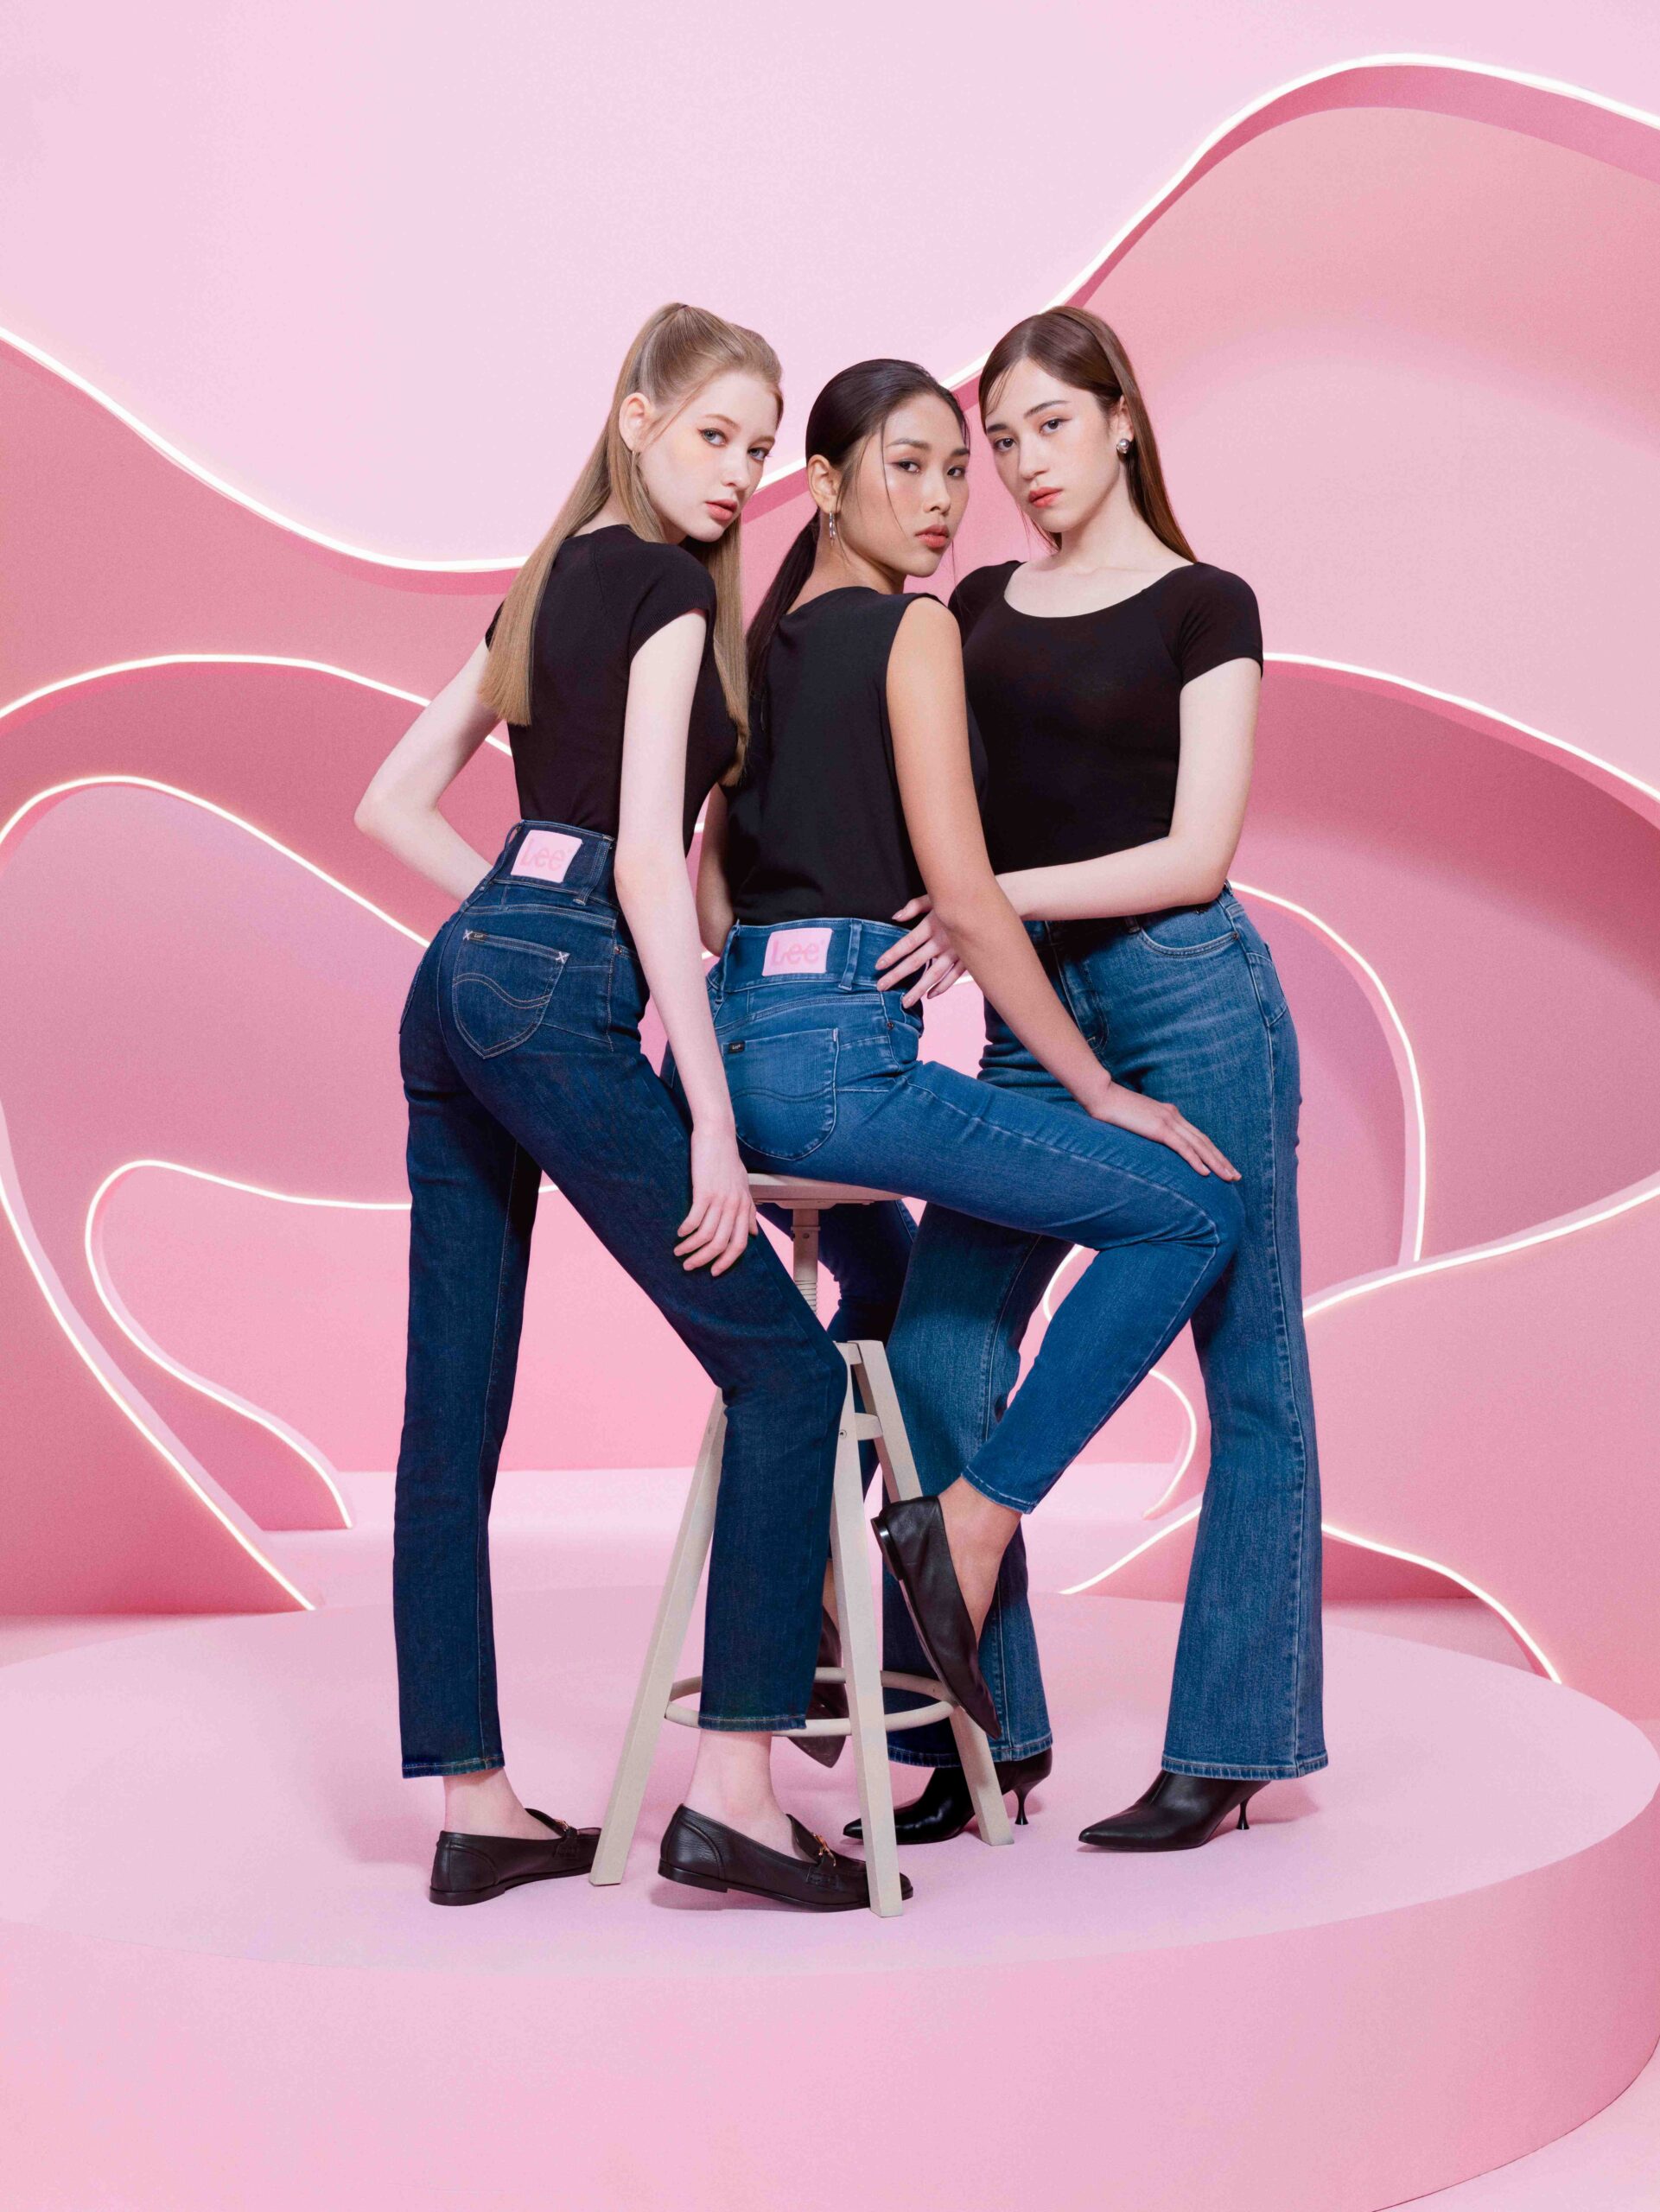 How to Find The Perfect Lee Jeans, According to Body Type